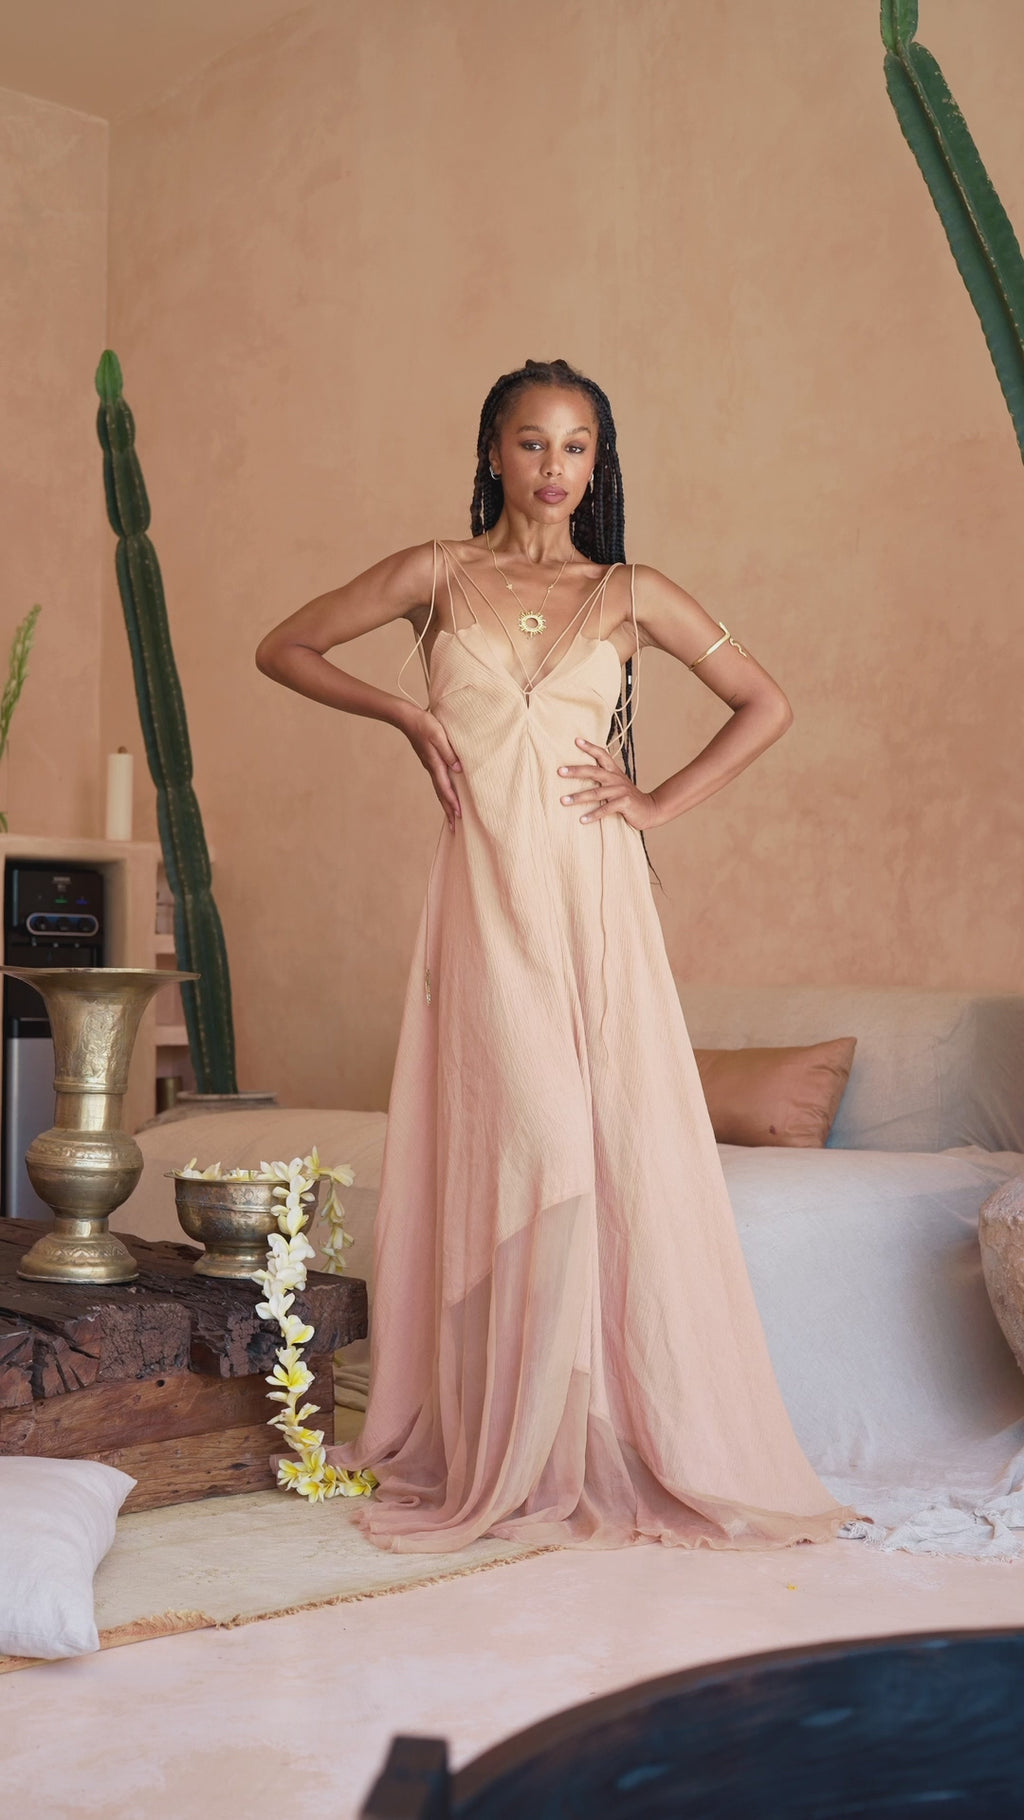 Find the perfect look for summer with the Greek Goddess Dress from Aya Sacred Wear. This stunning dress is perfect for any occasion and features vibrant colors and a timeless design that honors the goddesses of old.